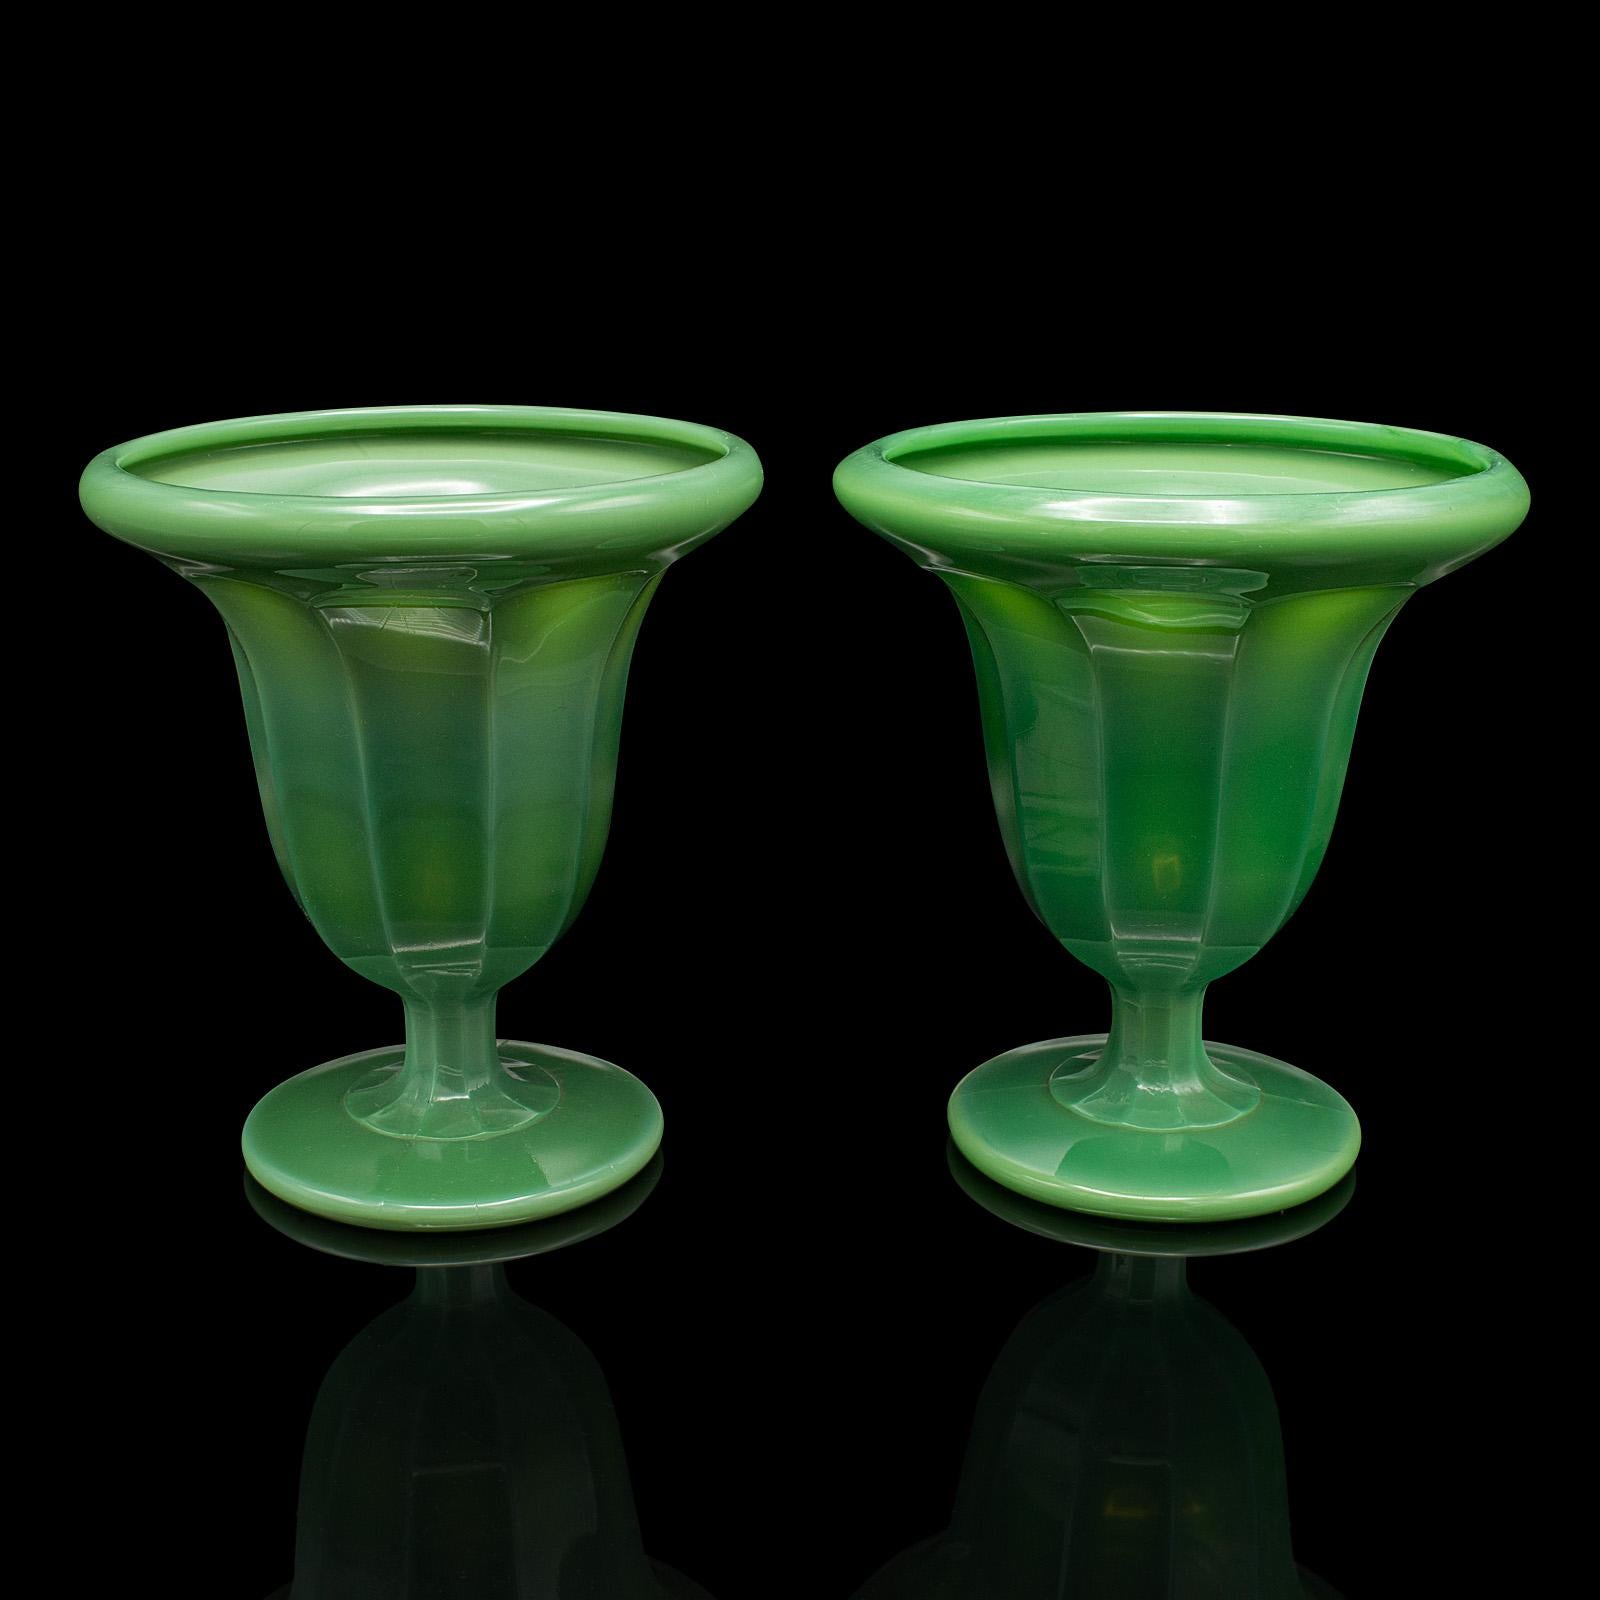 
This is a pair of vintage decorative vases. An English, cloud glass plant pot, dating to the Art Deco period, circa 1930.

Unusual glass finish with a distinctive green hue
Displays a desirable aged patina and in good order
Green cloud glass with a